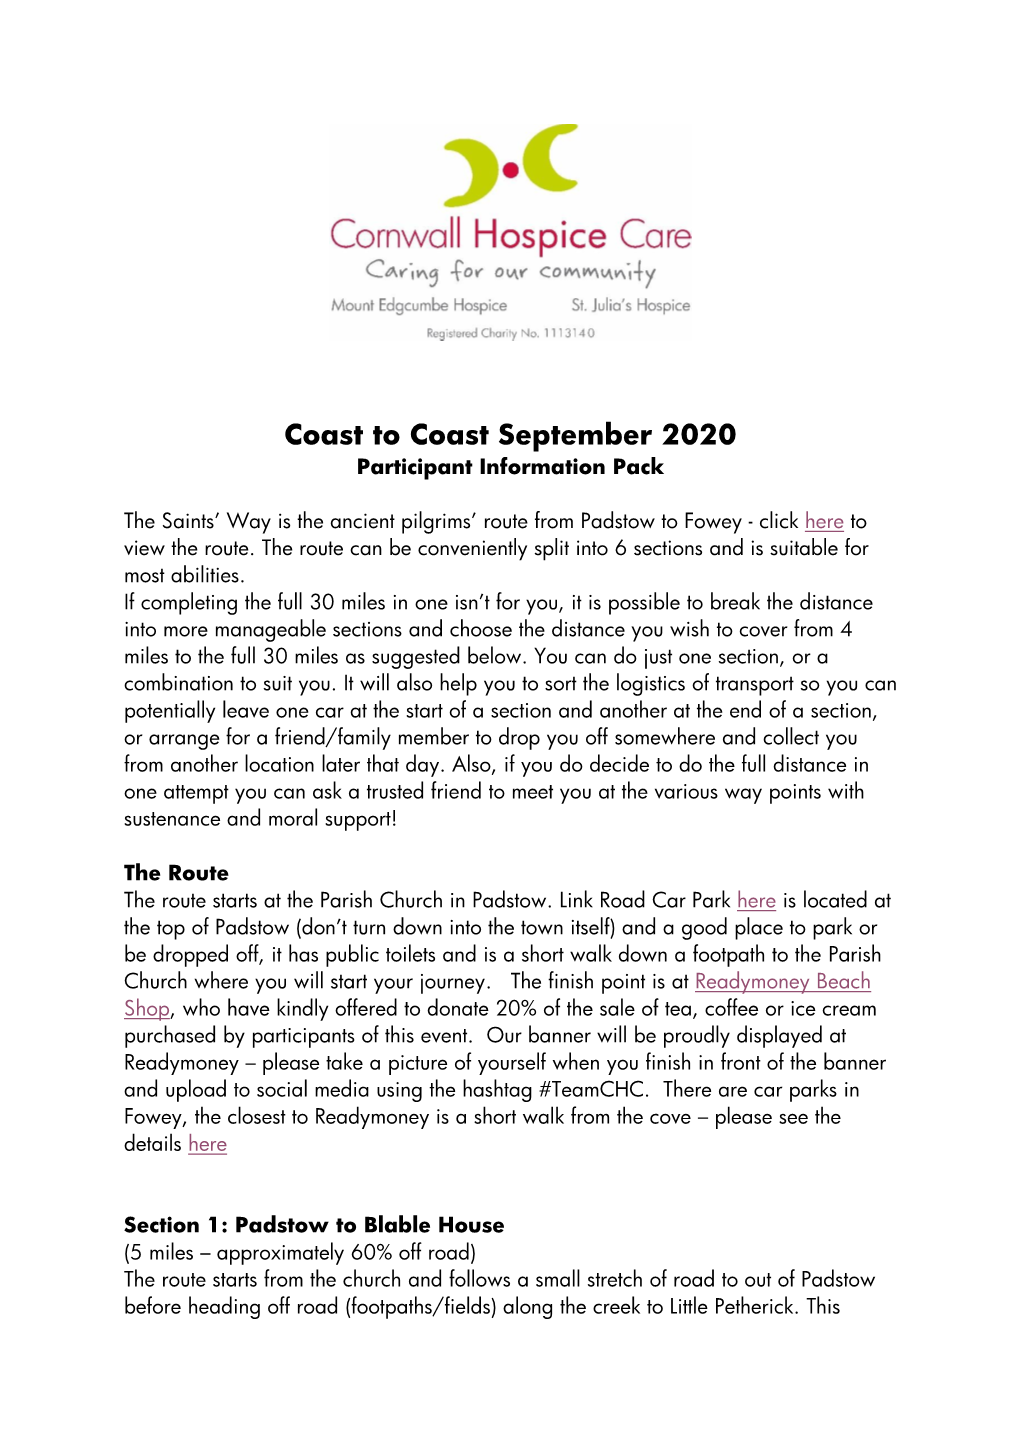 Coast to Coast September 2020 Participant Information Pack